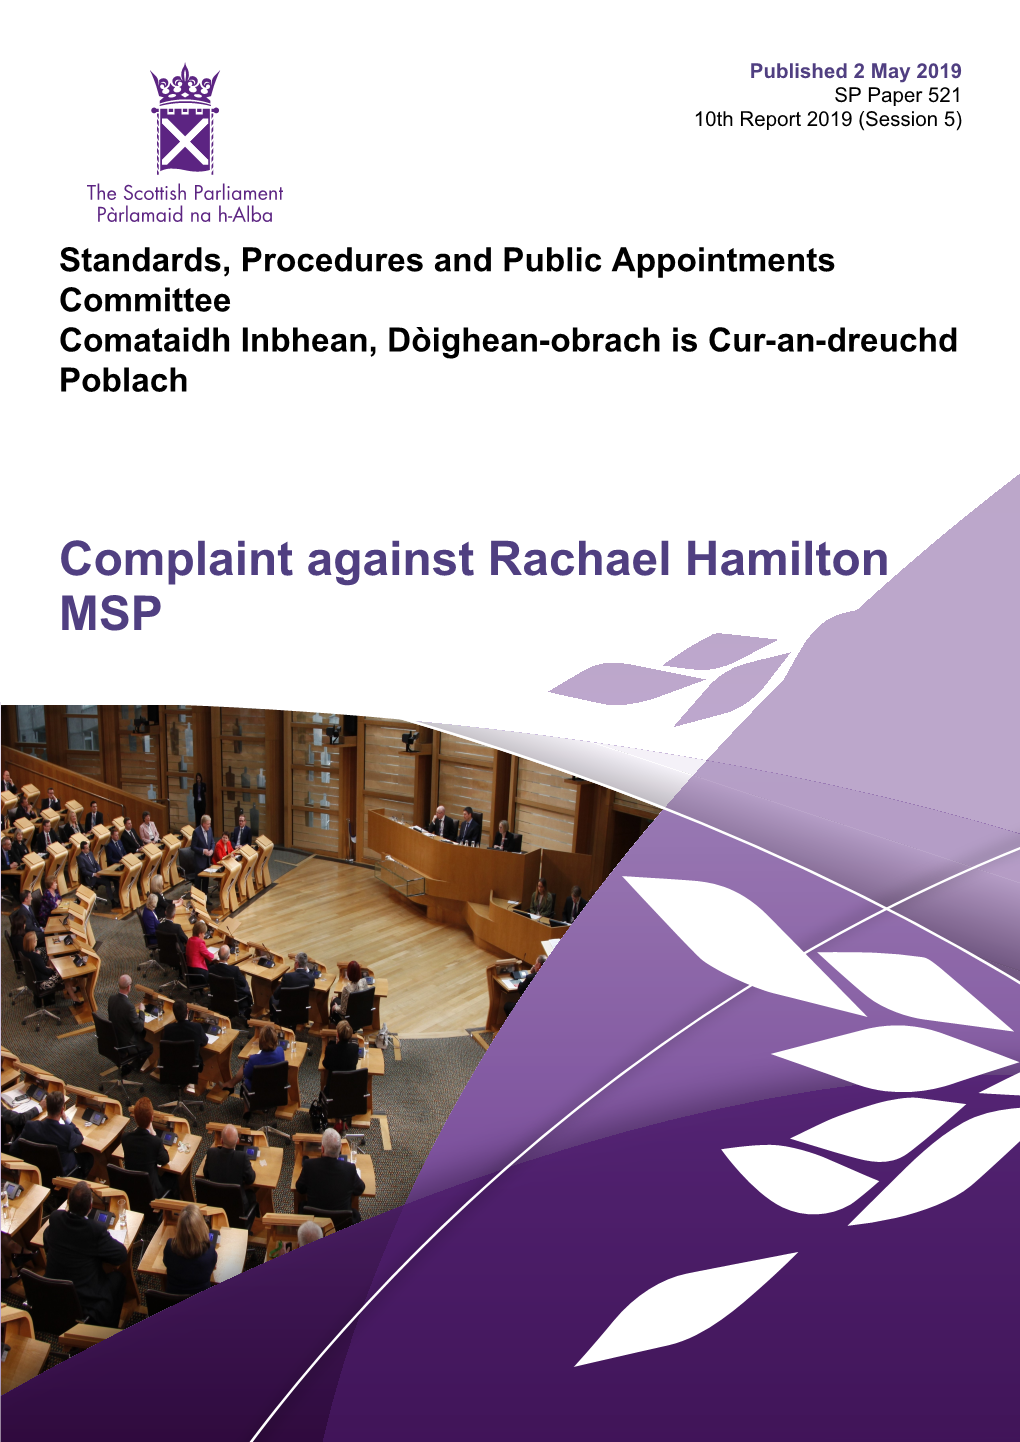 Complaint Against Rachael Hamilton MSP Published in Scotland by the Scottish Parliamentary Corporate Body